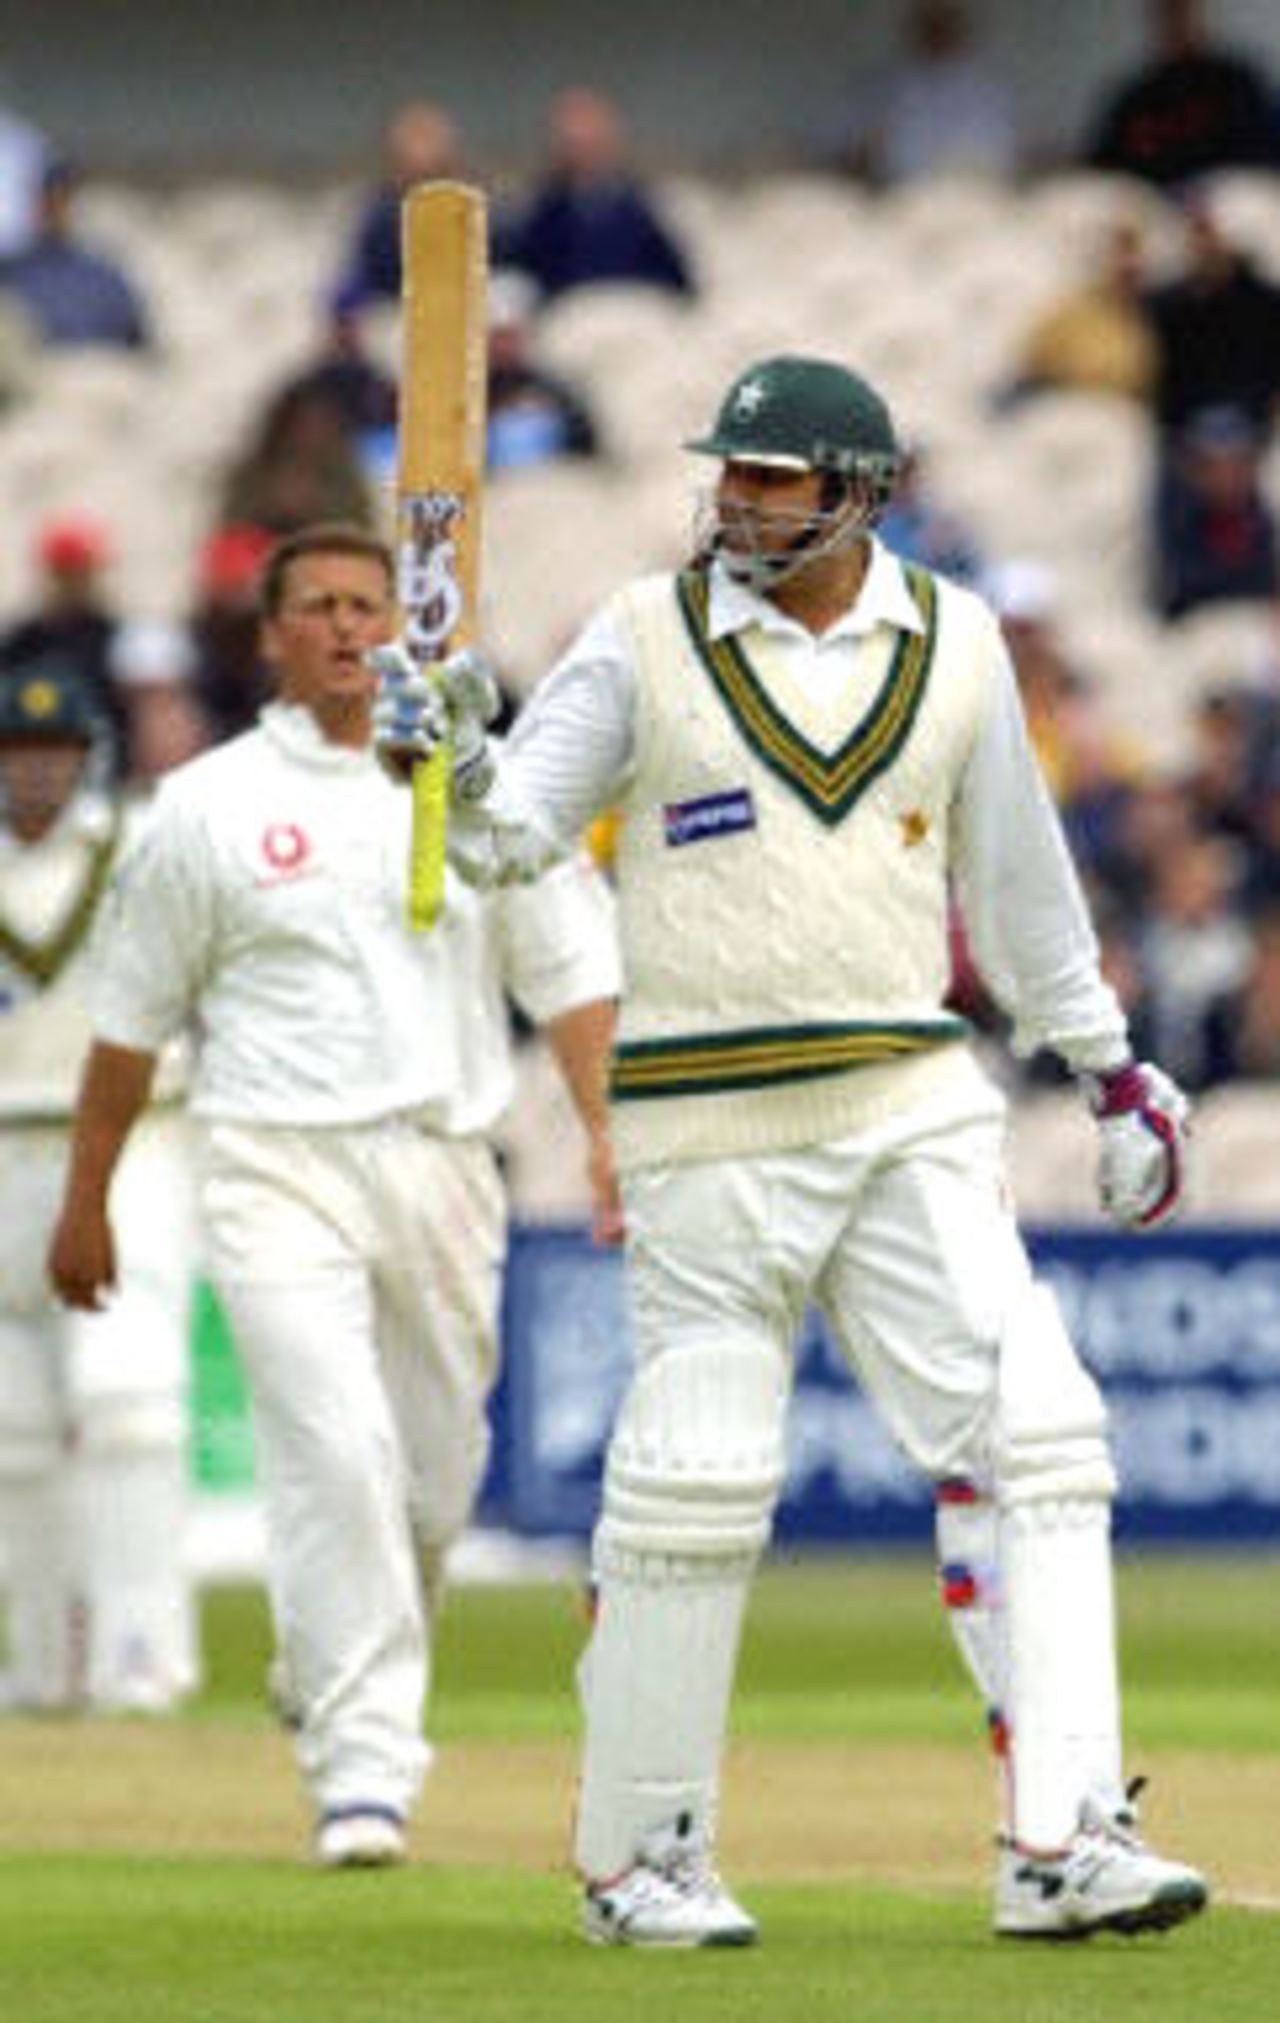 Pakistani batsman Inzamam-ul-Haq celebrates a half century as he is watched by Darren Gough, day 1, 2nd Test at Old Trafford, 31 May - 4 June 2001.